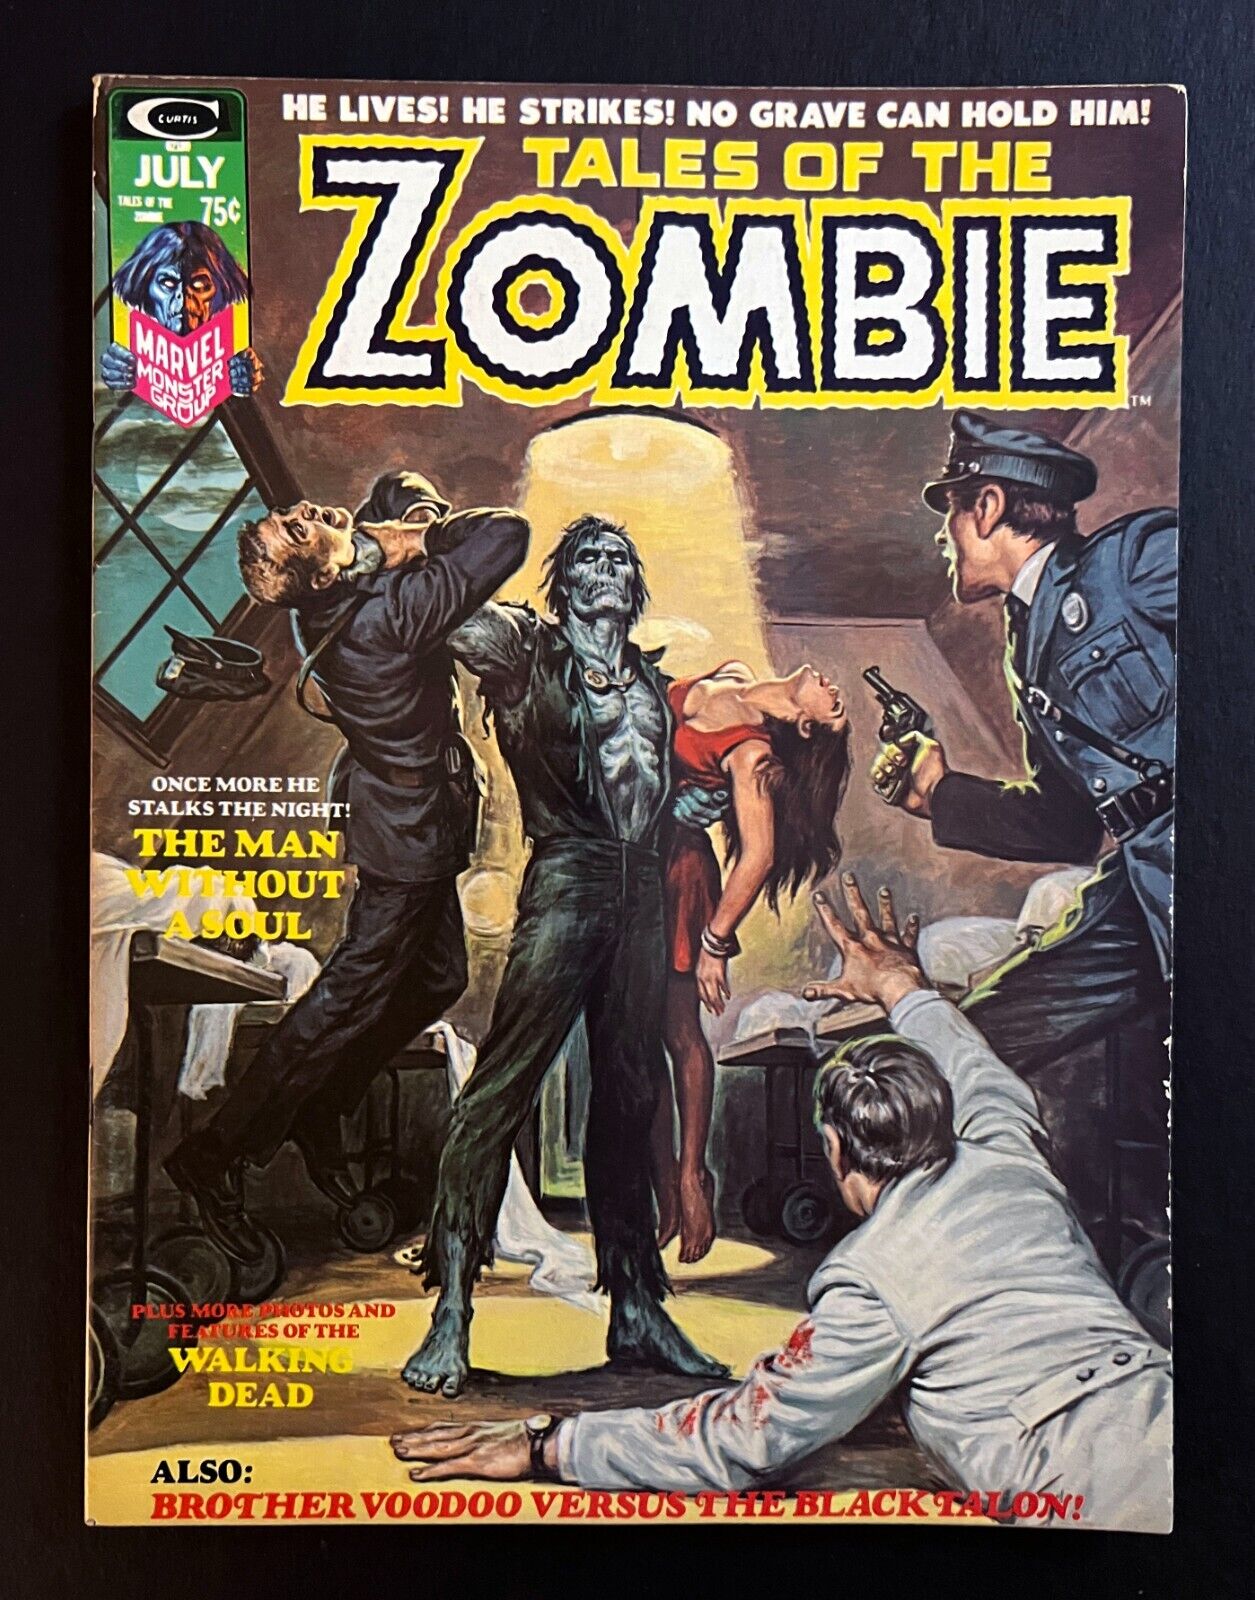 TALES OF THE ZOMBIE #6 BROTHER VOODOO B&W Horror Gene Colon Art Marvel 1974